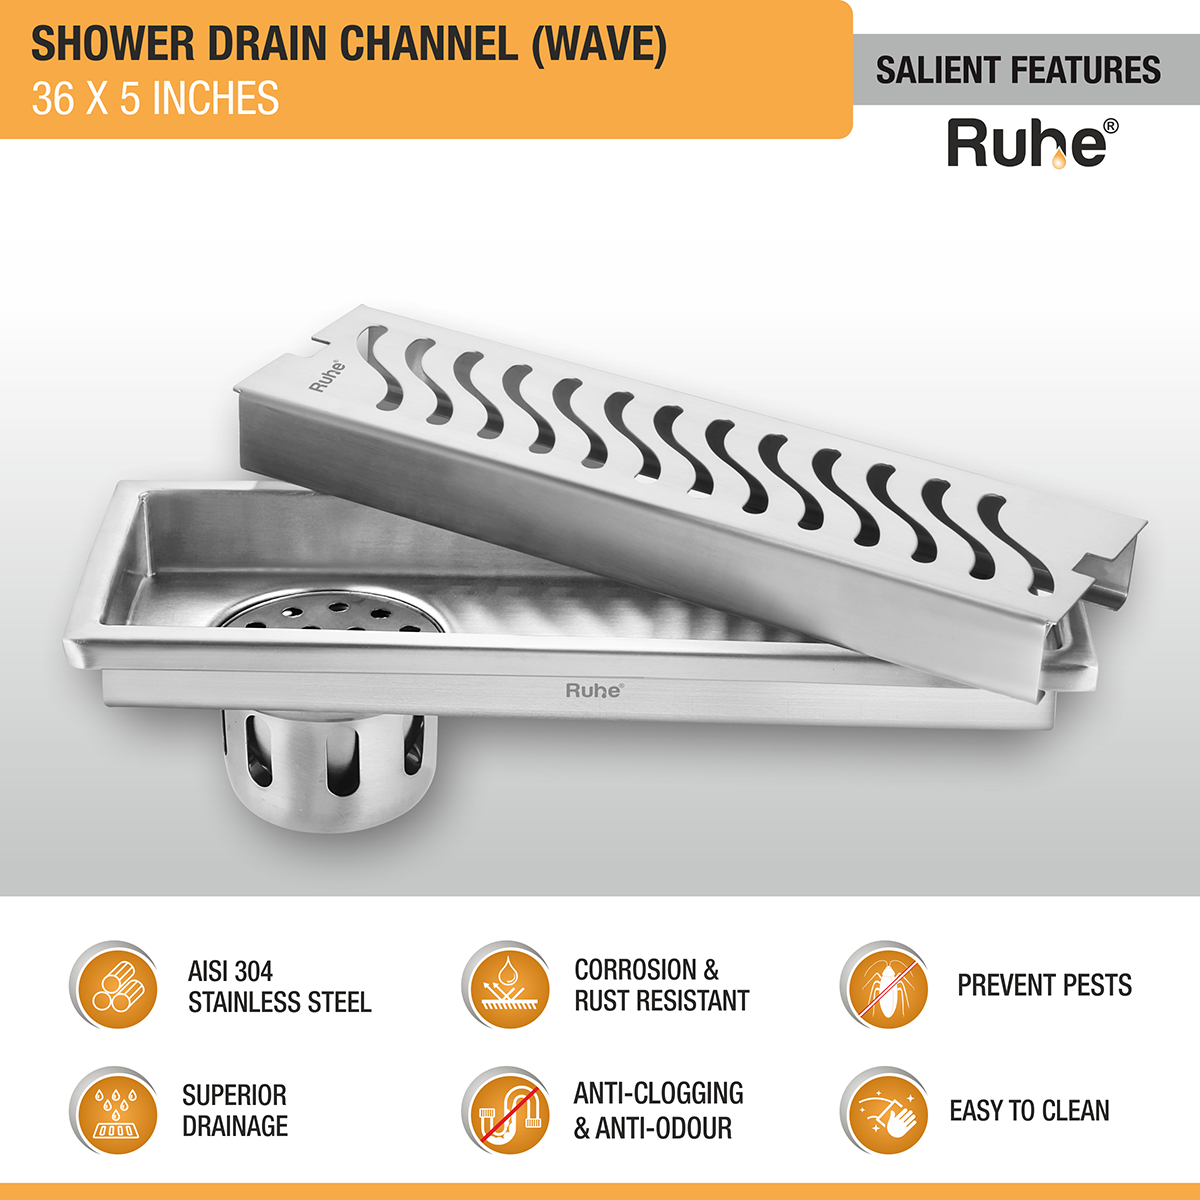 Wave Shower Drain Channel (36 X 5 Inches) with Cockroach Trap (304 Grade) features